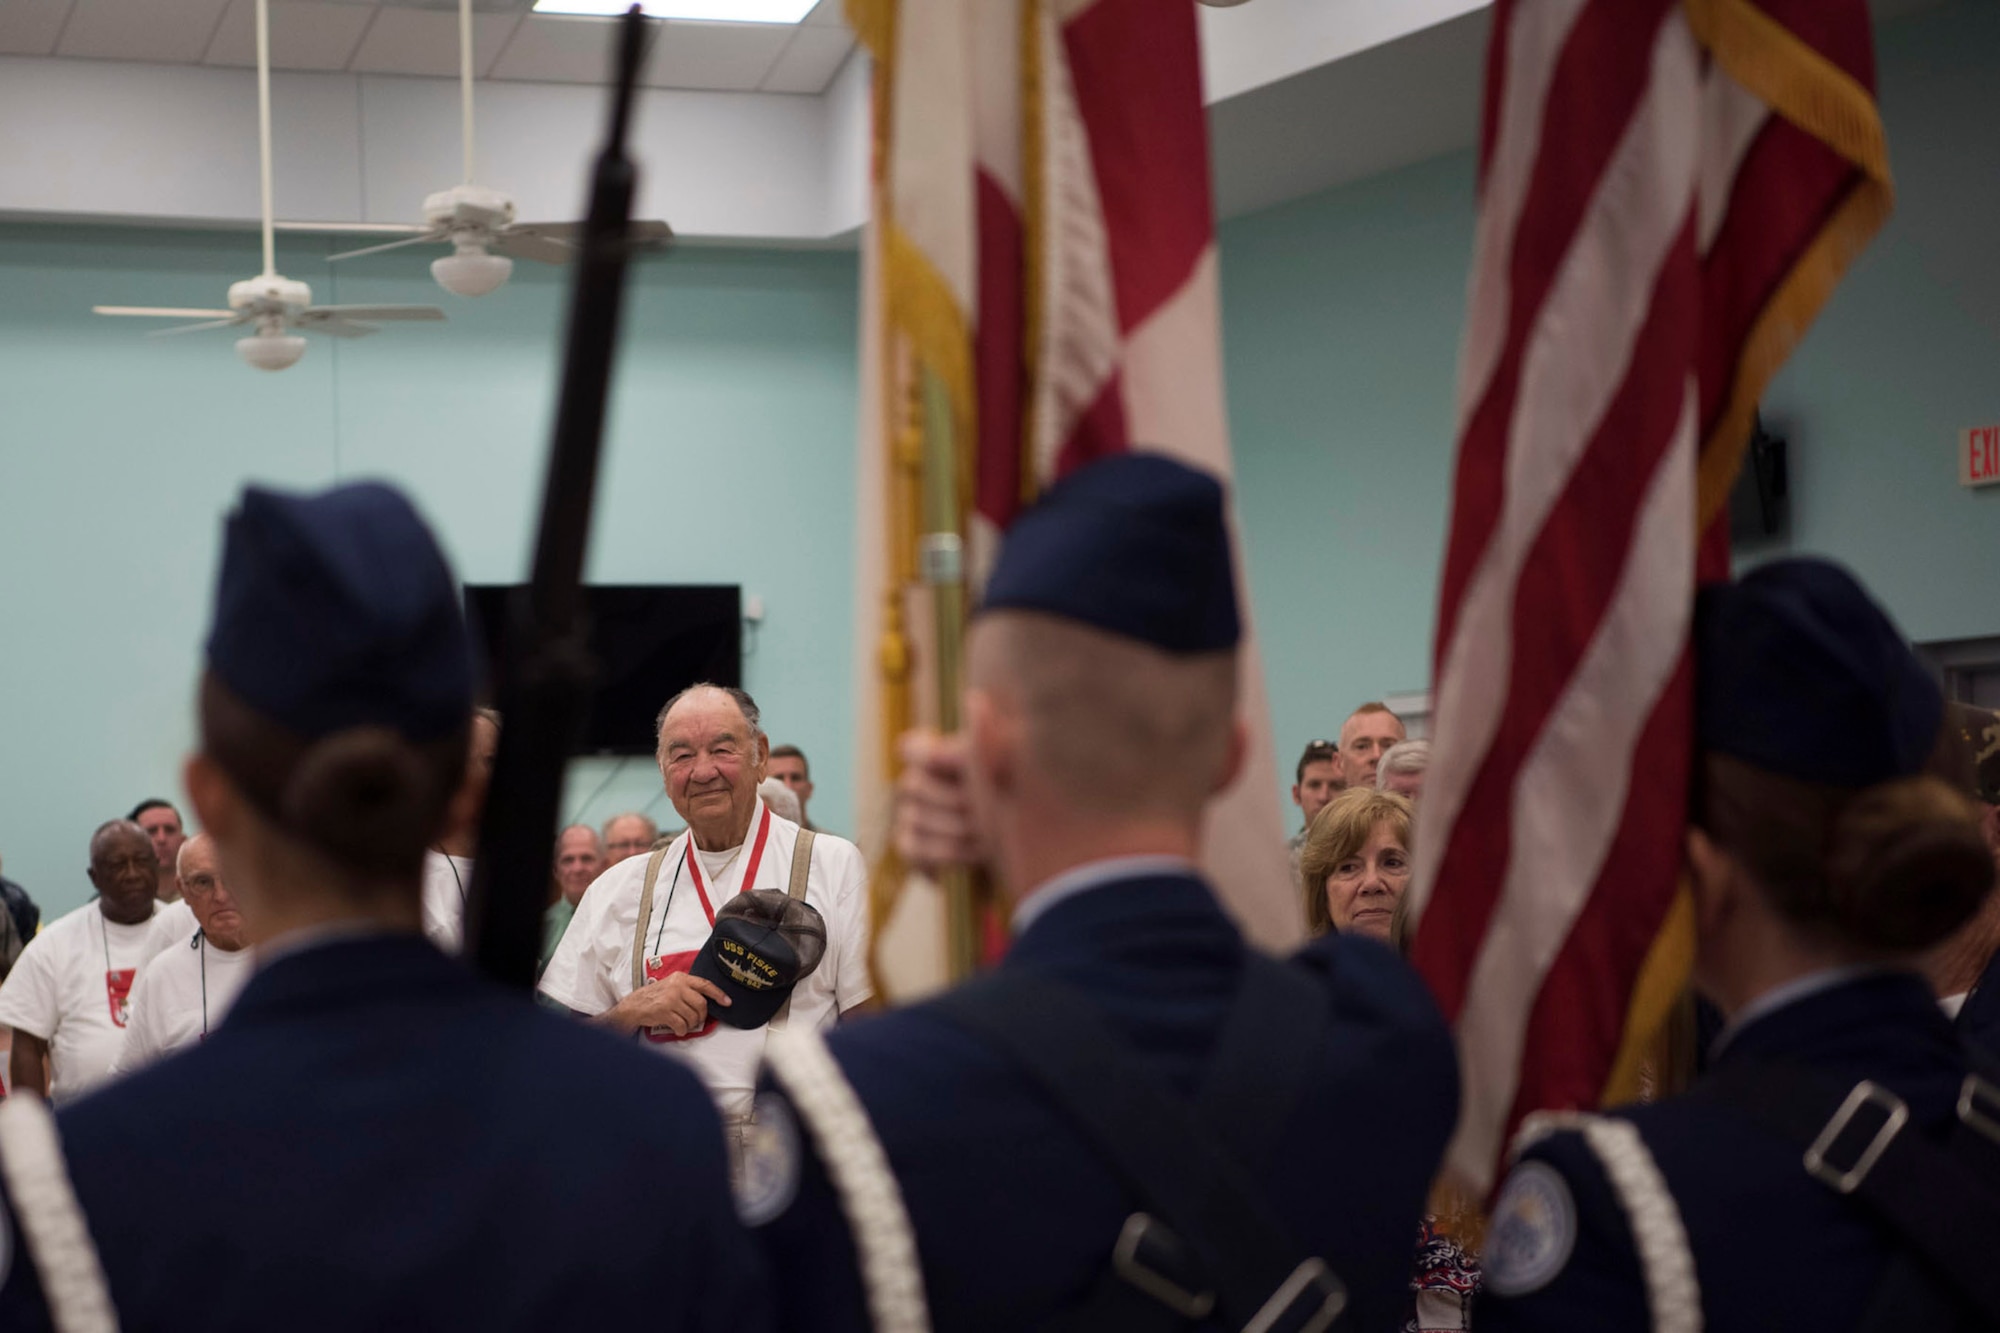 Veterans, current service members, family and friends recite the Pledge of Allegiance as the Colors are presented May 26, 2018 during Honor Flight send off at Wickham Park Senior Center in Melbourne, Fla. 25 veterans, along with their guardians, were able to visit Washington D.C. on this Honor Flight. (U.S. Air Force photo by Airman 1st Class Zoe Thacker)